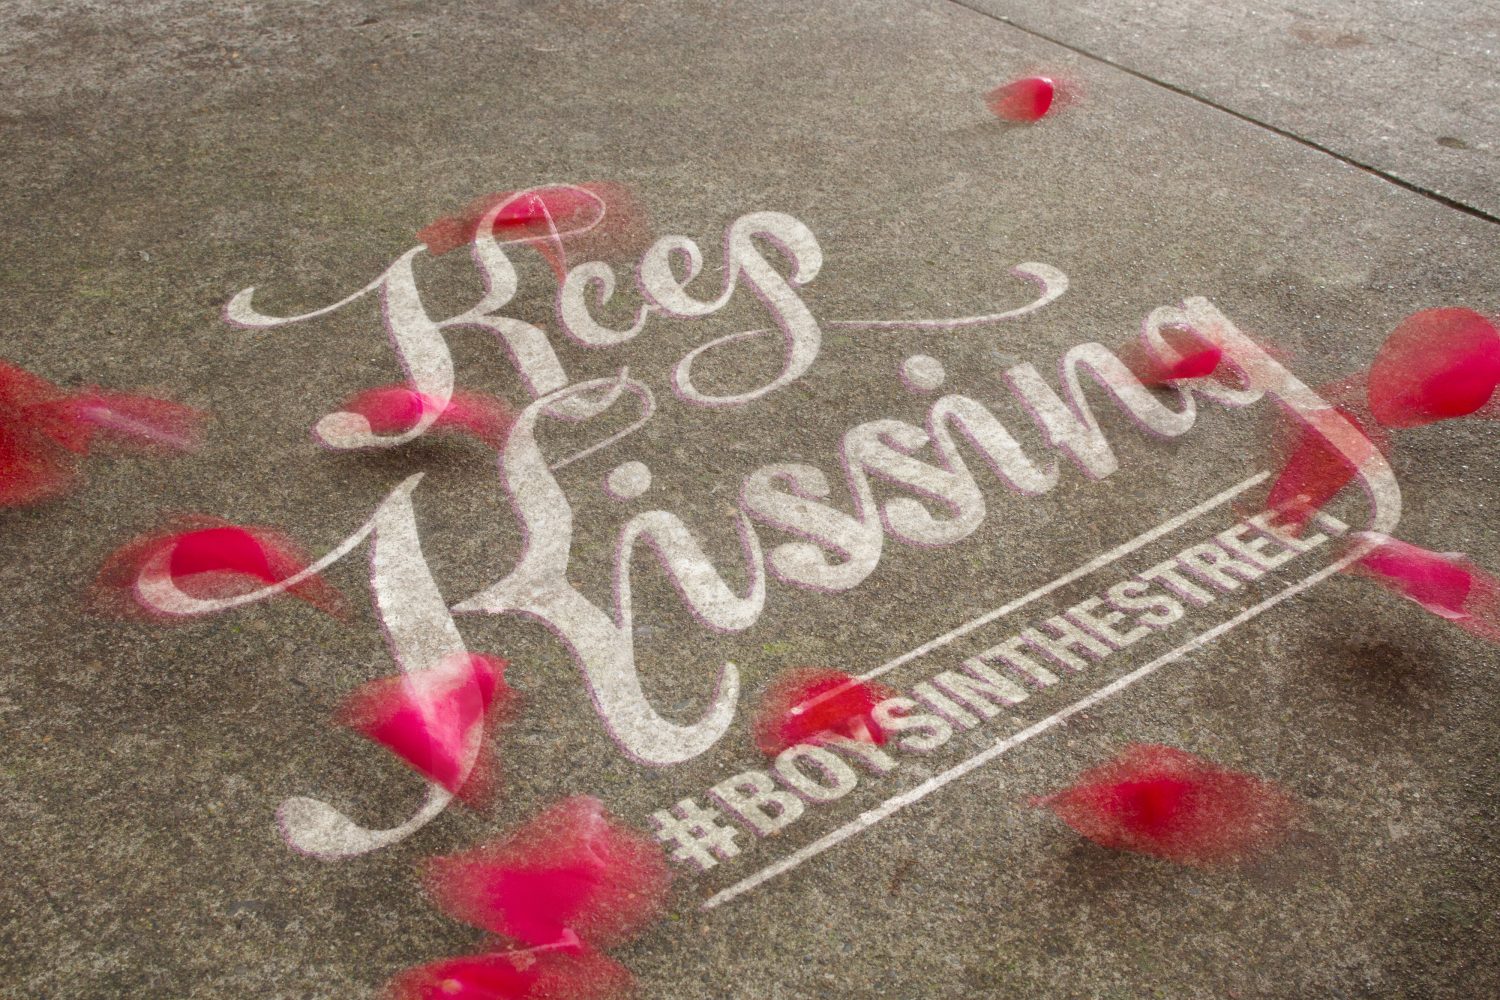 Keep Kissing Boys on the Street song title graffiti art with rose petals